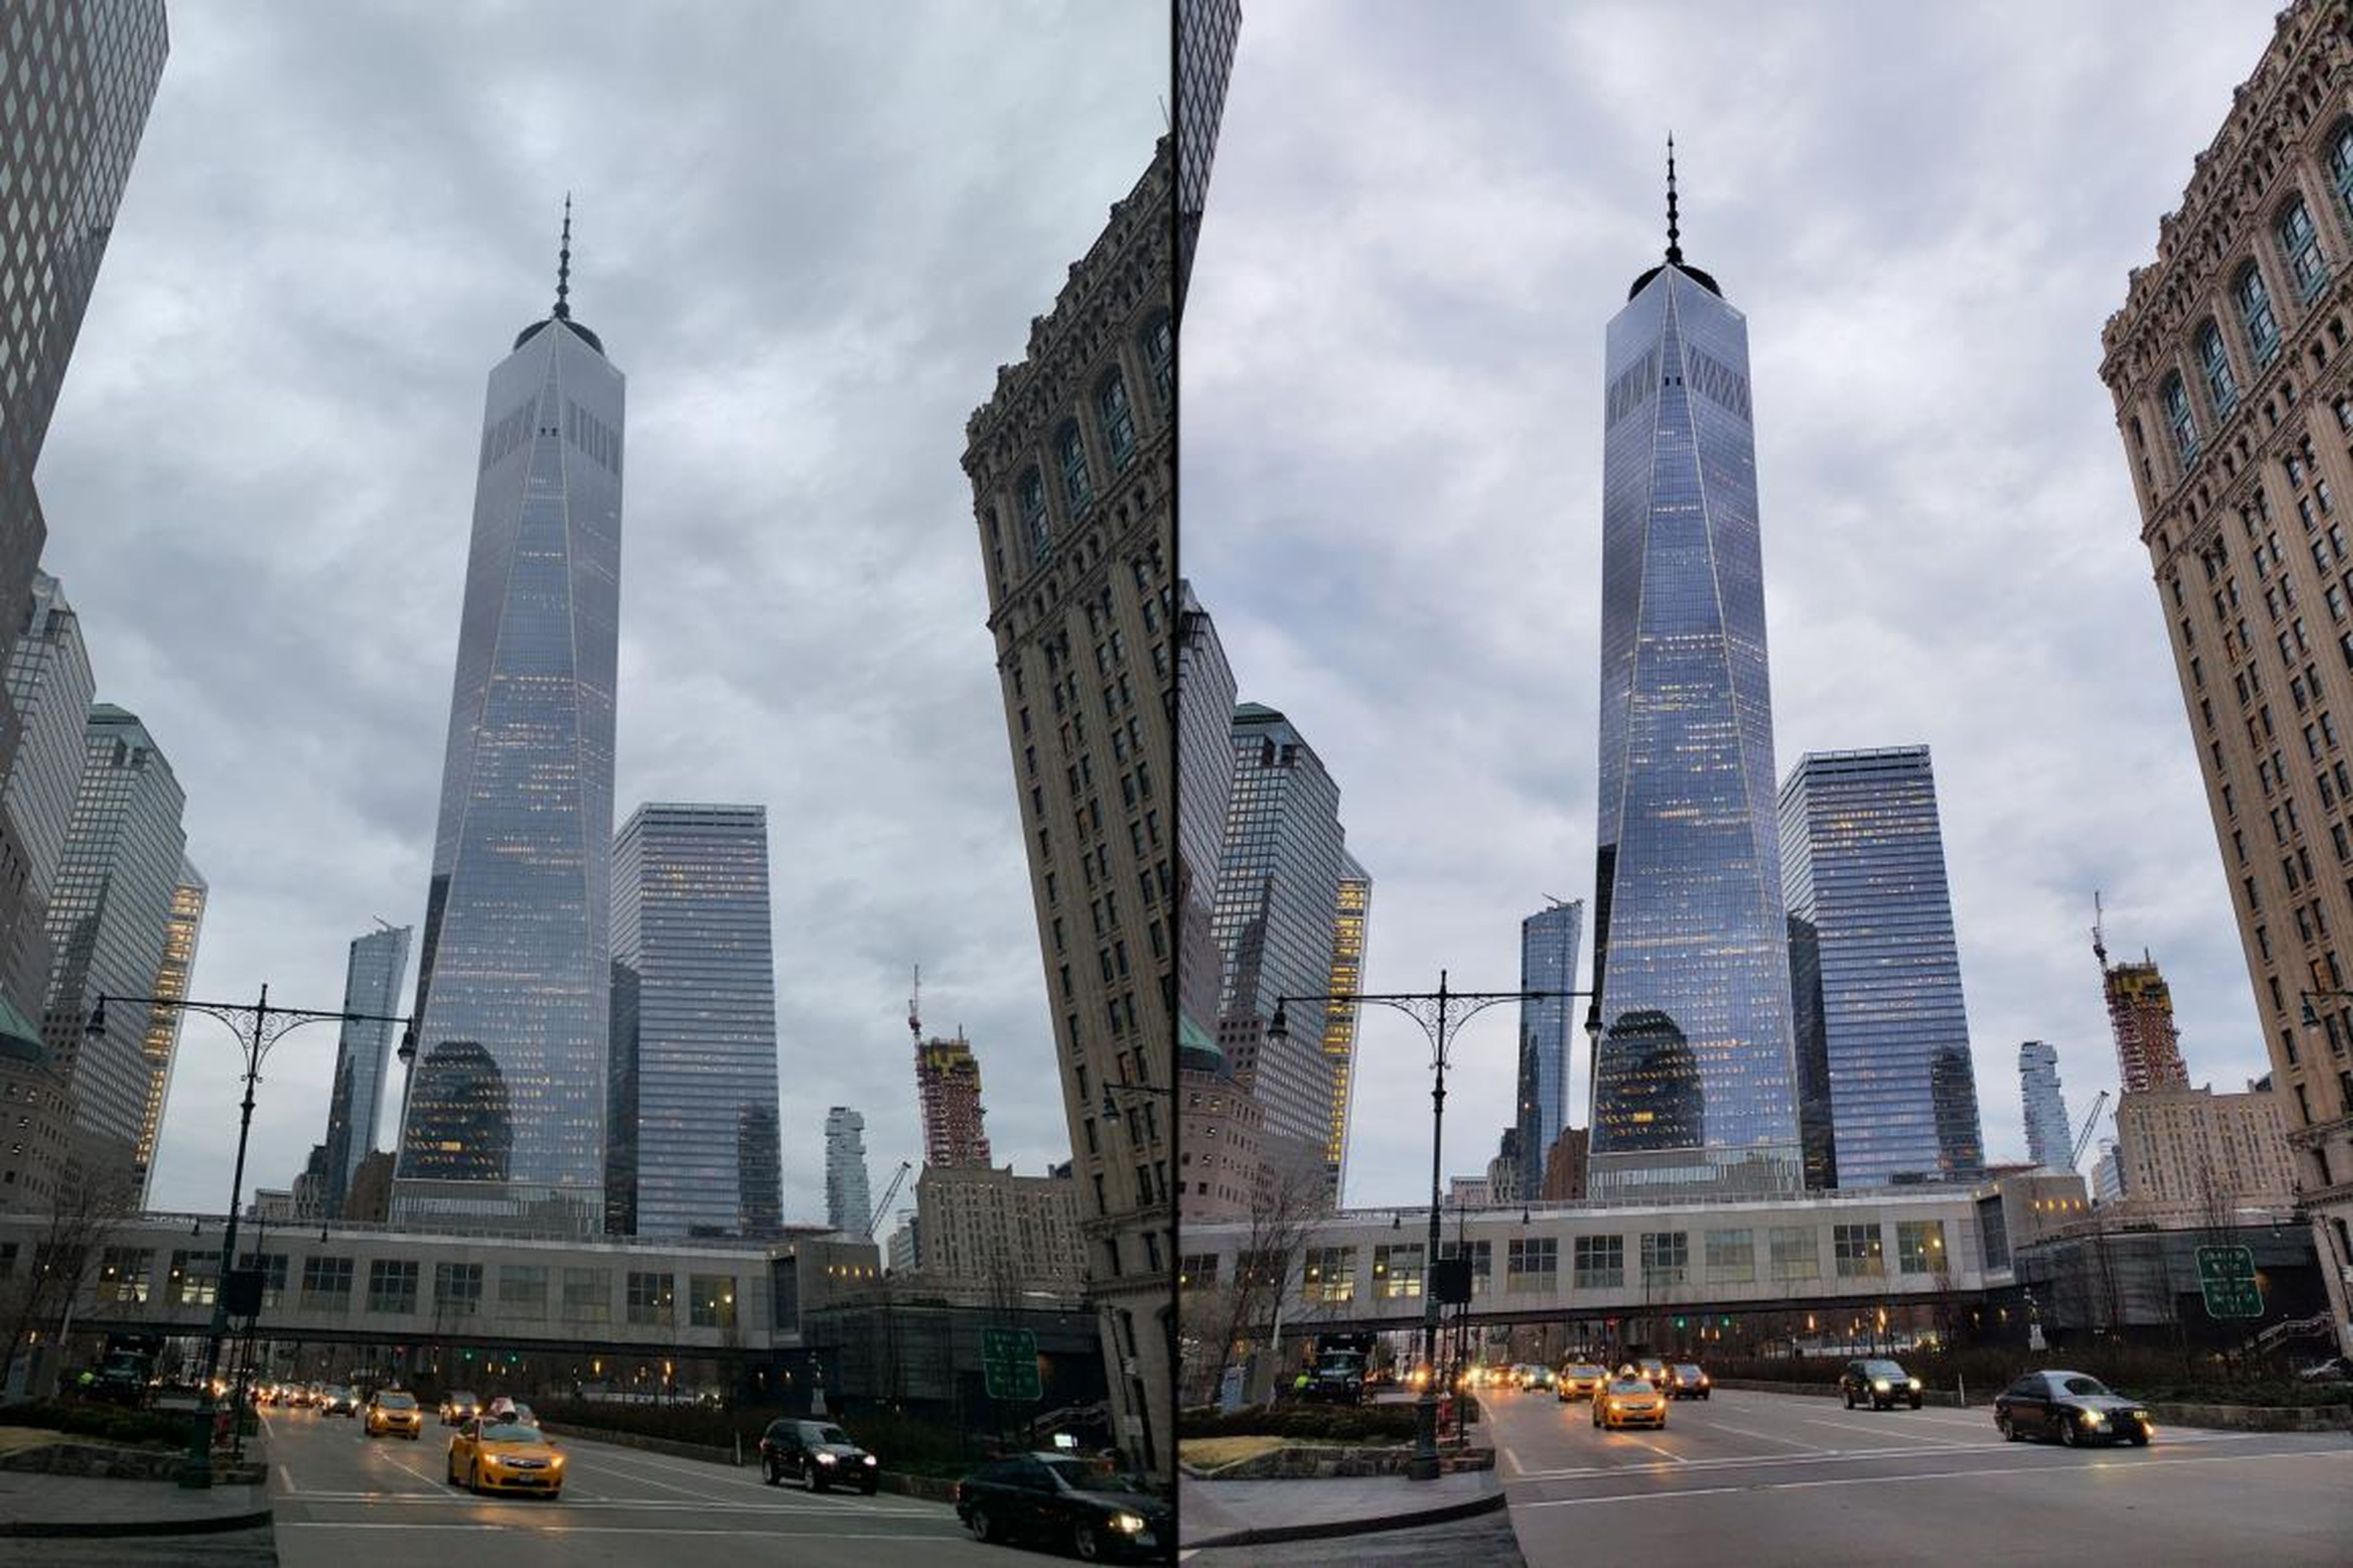 iPhone Xs Max (left), Galaxy S10+ (right): The Galaxy S10+ shot is clearer, more vibrant, and is oriented straight.